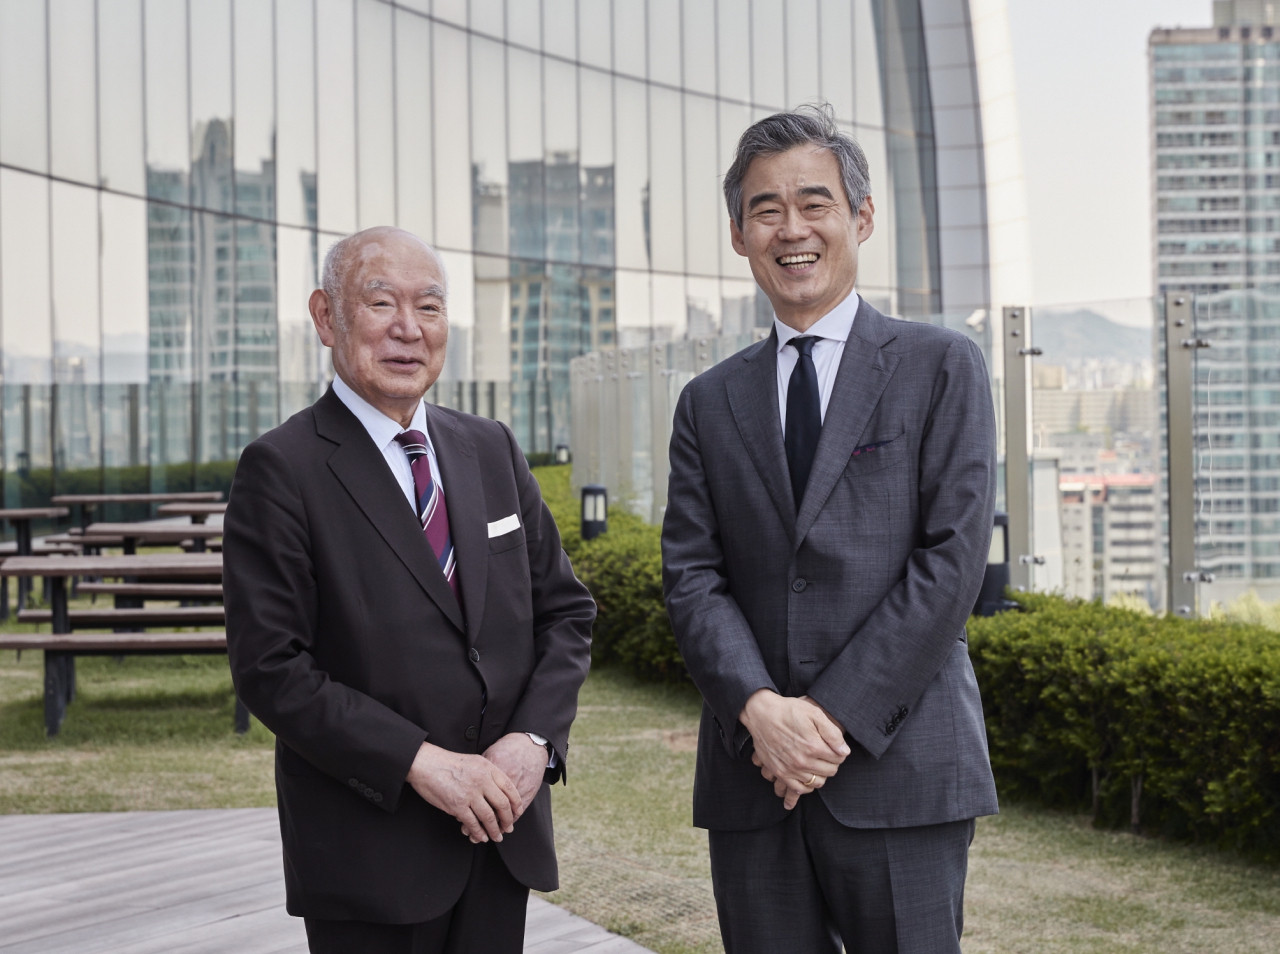 Cellists Tsuyoshi Tsutsumi (left) and Yang Sung-won pose for photos at the Lotte Concert Hall in Jamsil, Seoul, May 14. (Lotte Concert Hall)